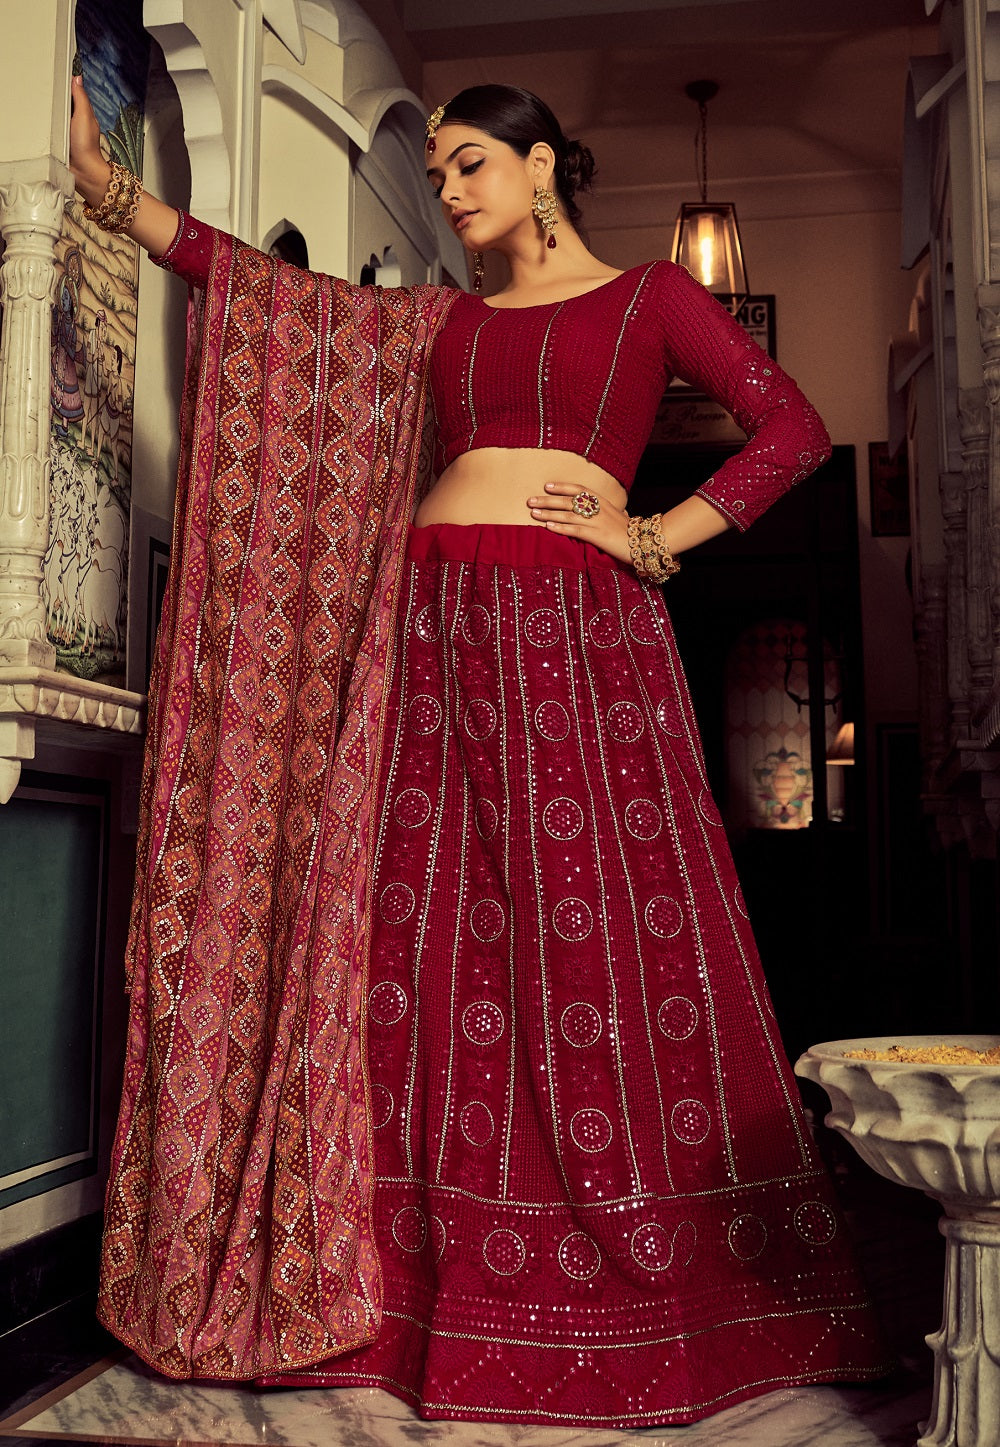 Embroidered Georgette Lehenga in Pink